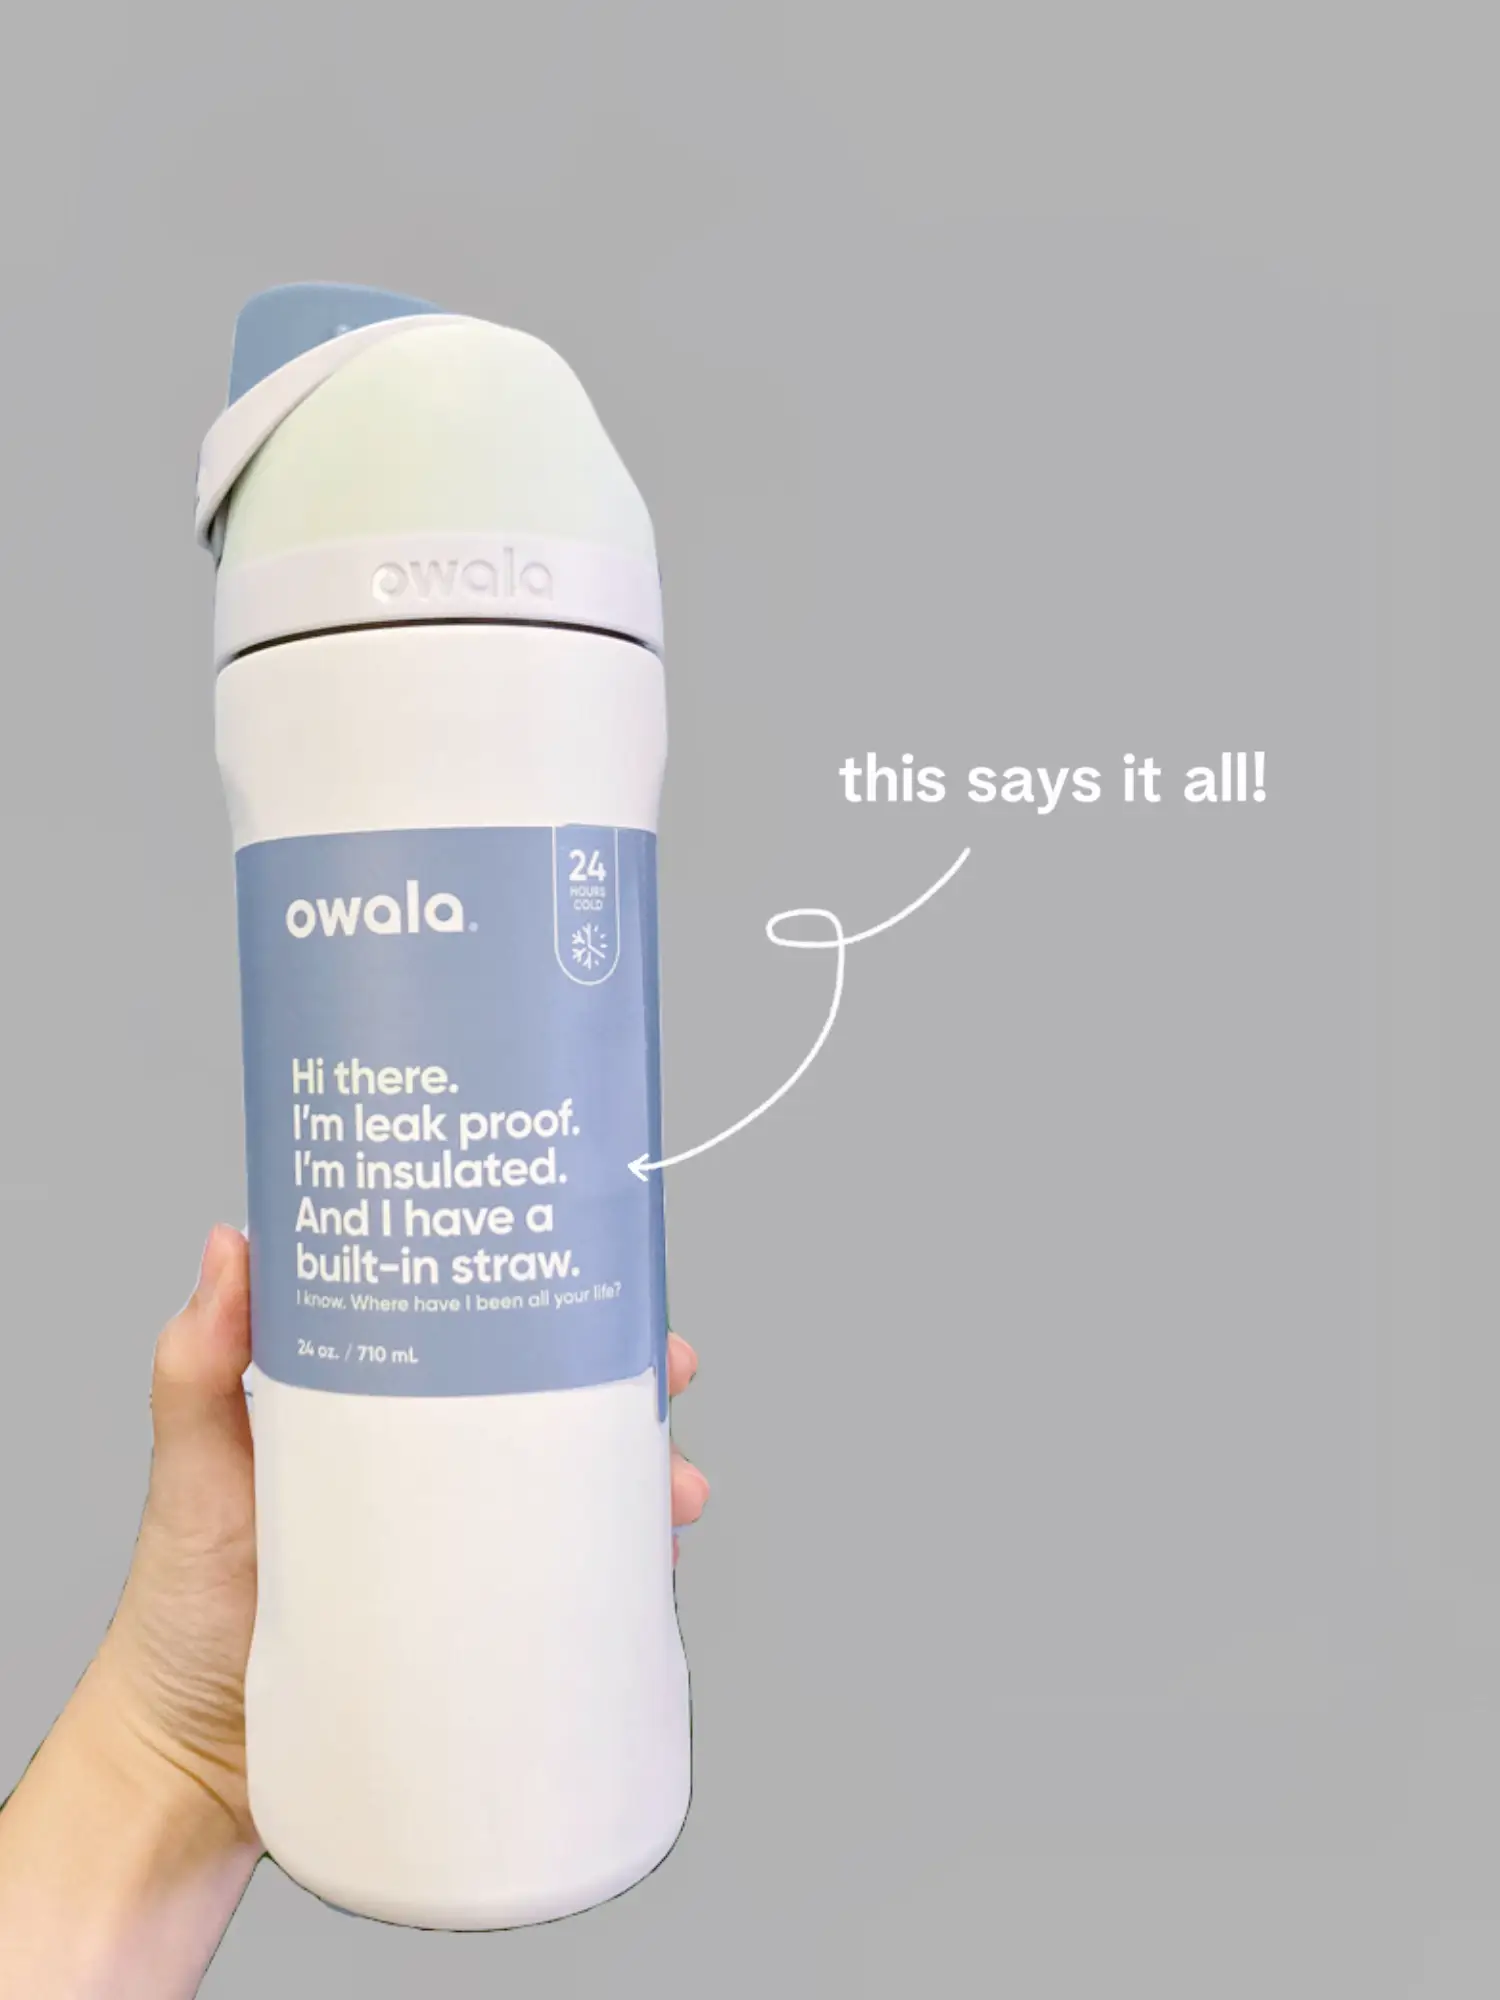 owala >>> any other bottle brand, Gallery posted by anna